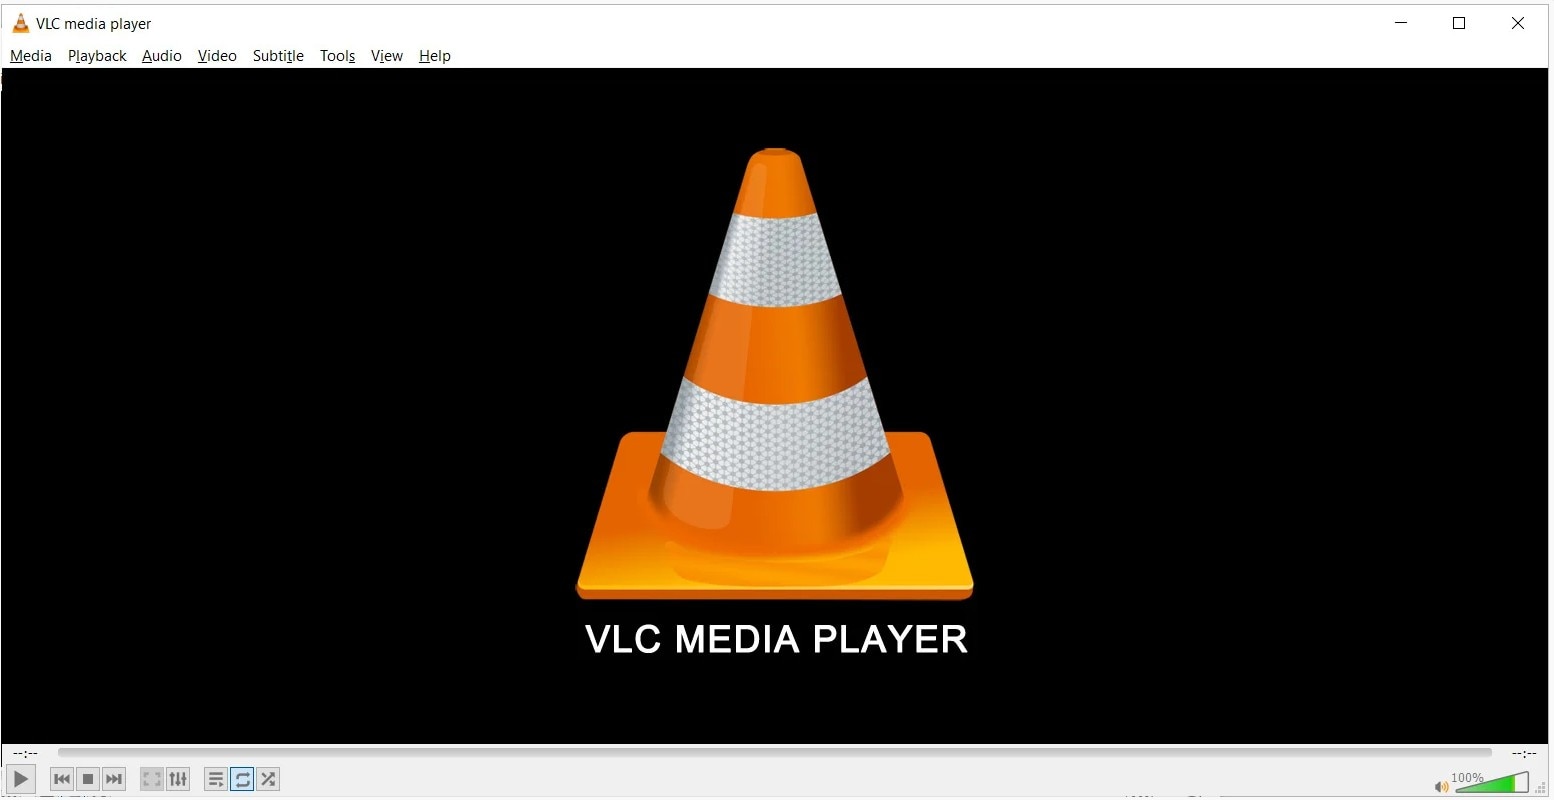 vlc media player to play m4v videos on any device